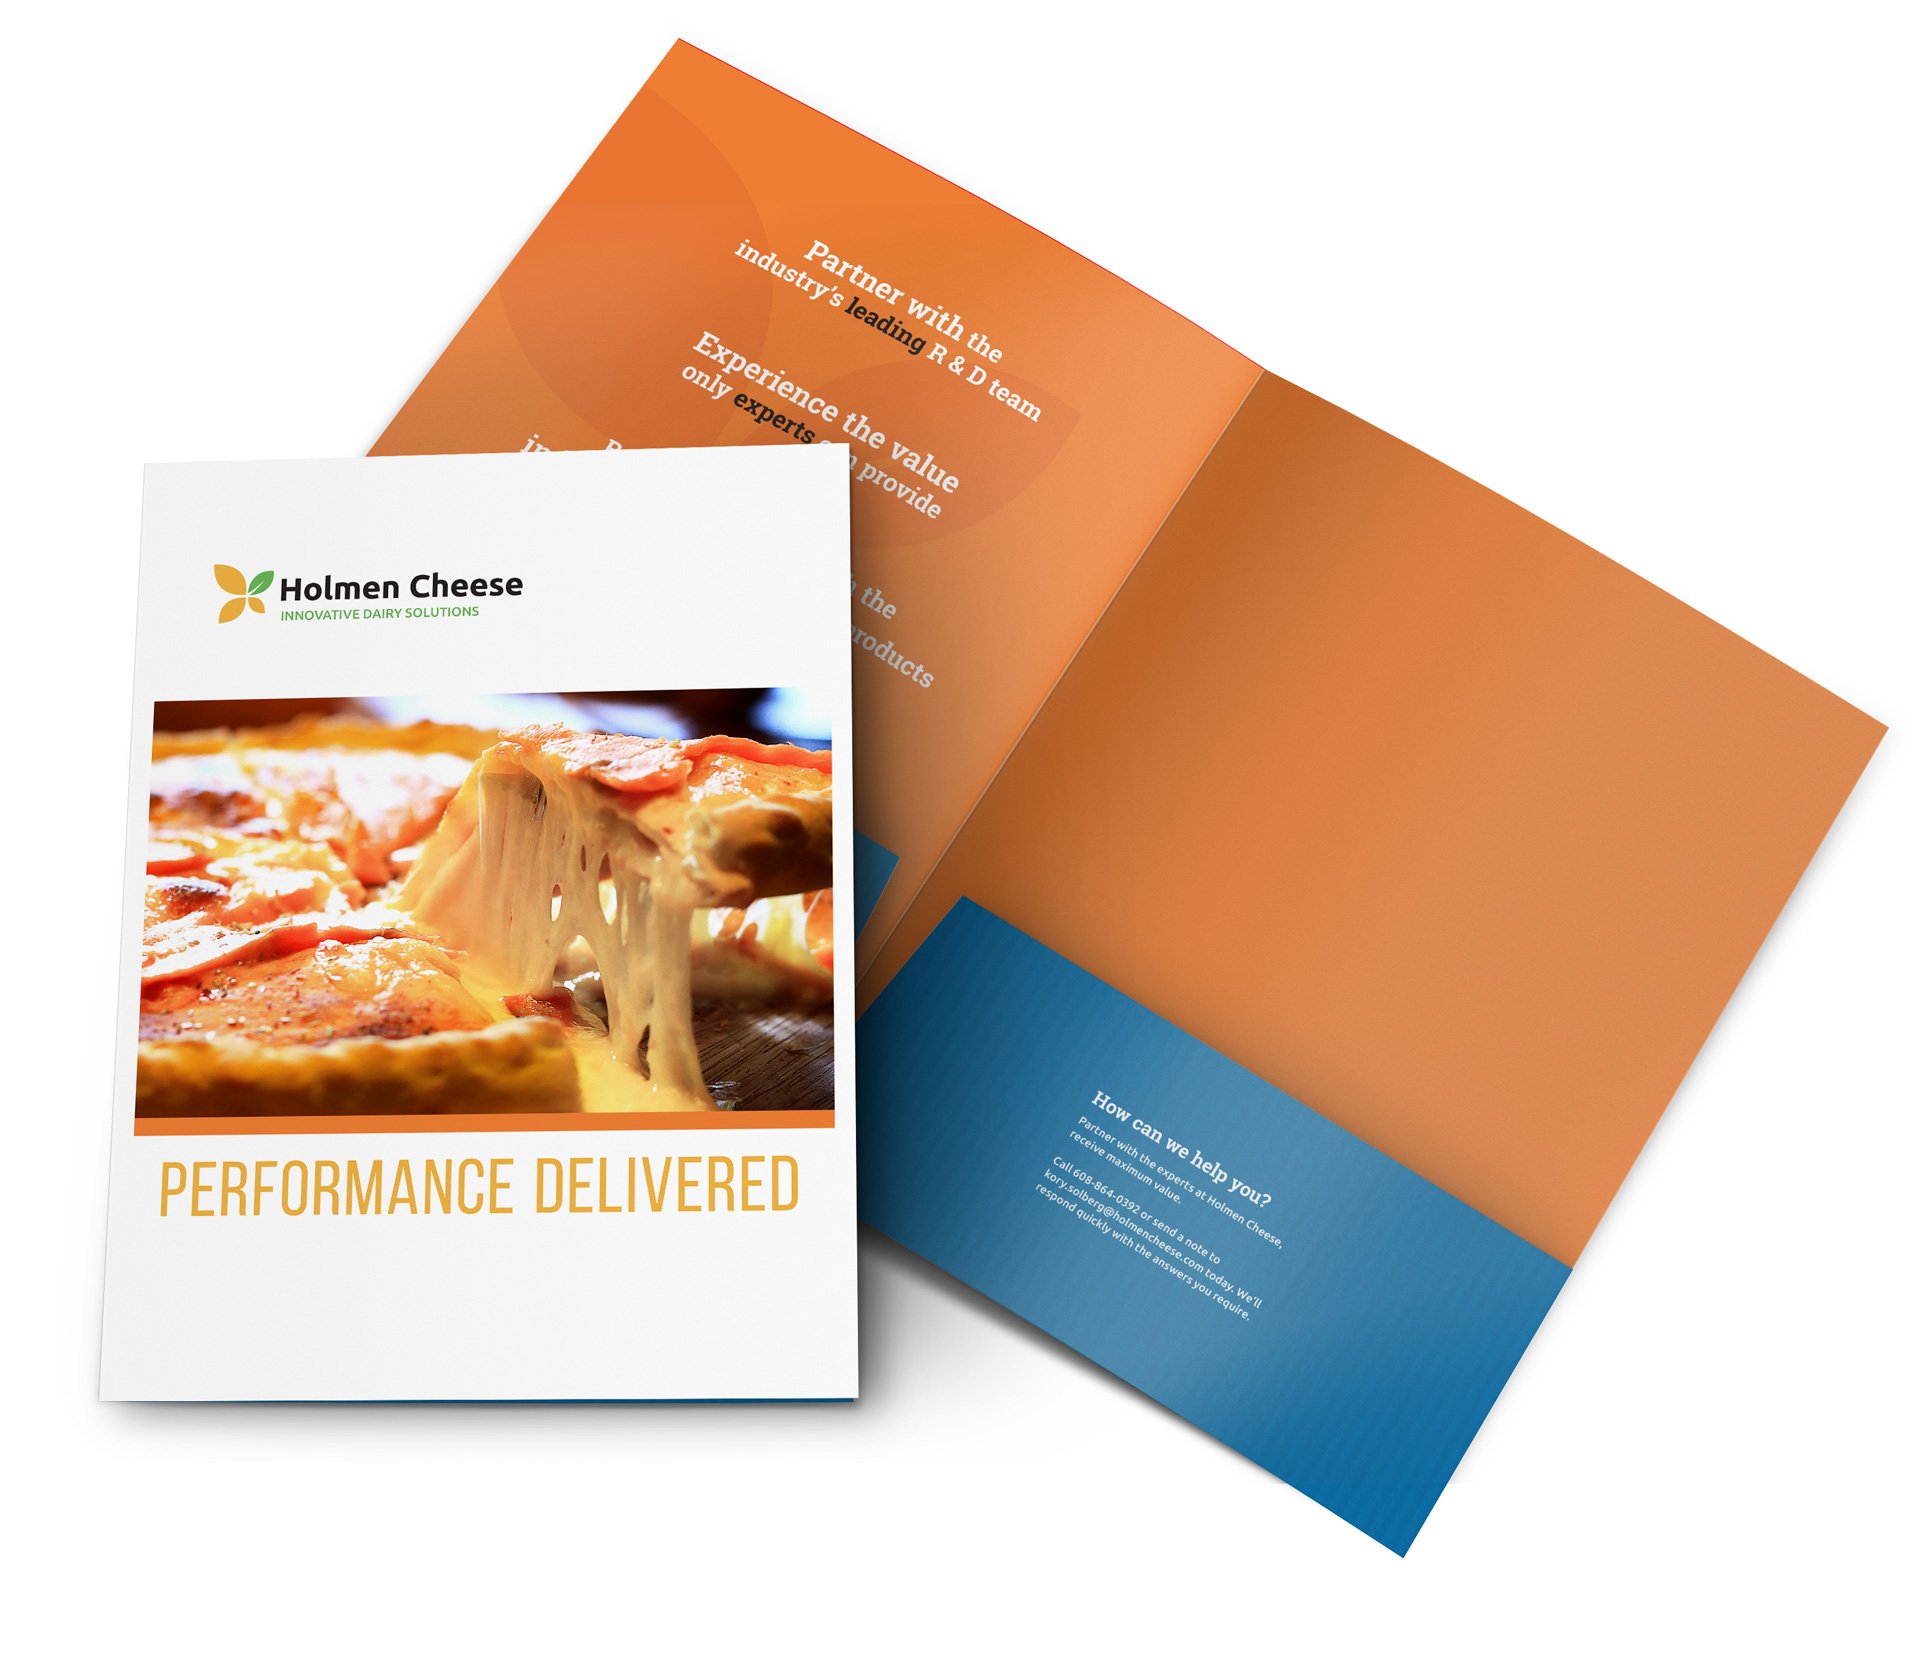 Holmen Cheese 2-pocket, color folder with front pizza photo and performance delivered headline and company attributes inside